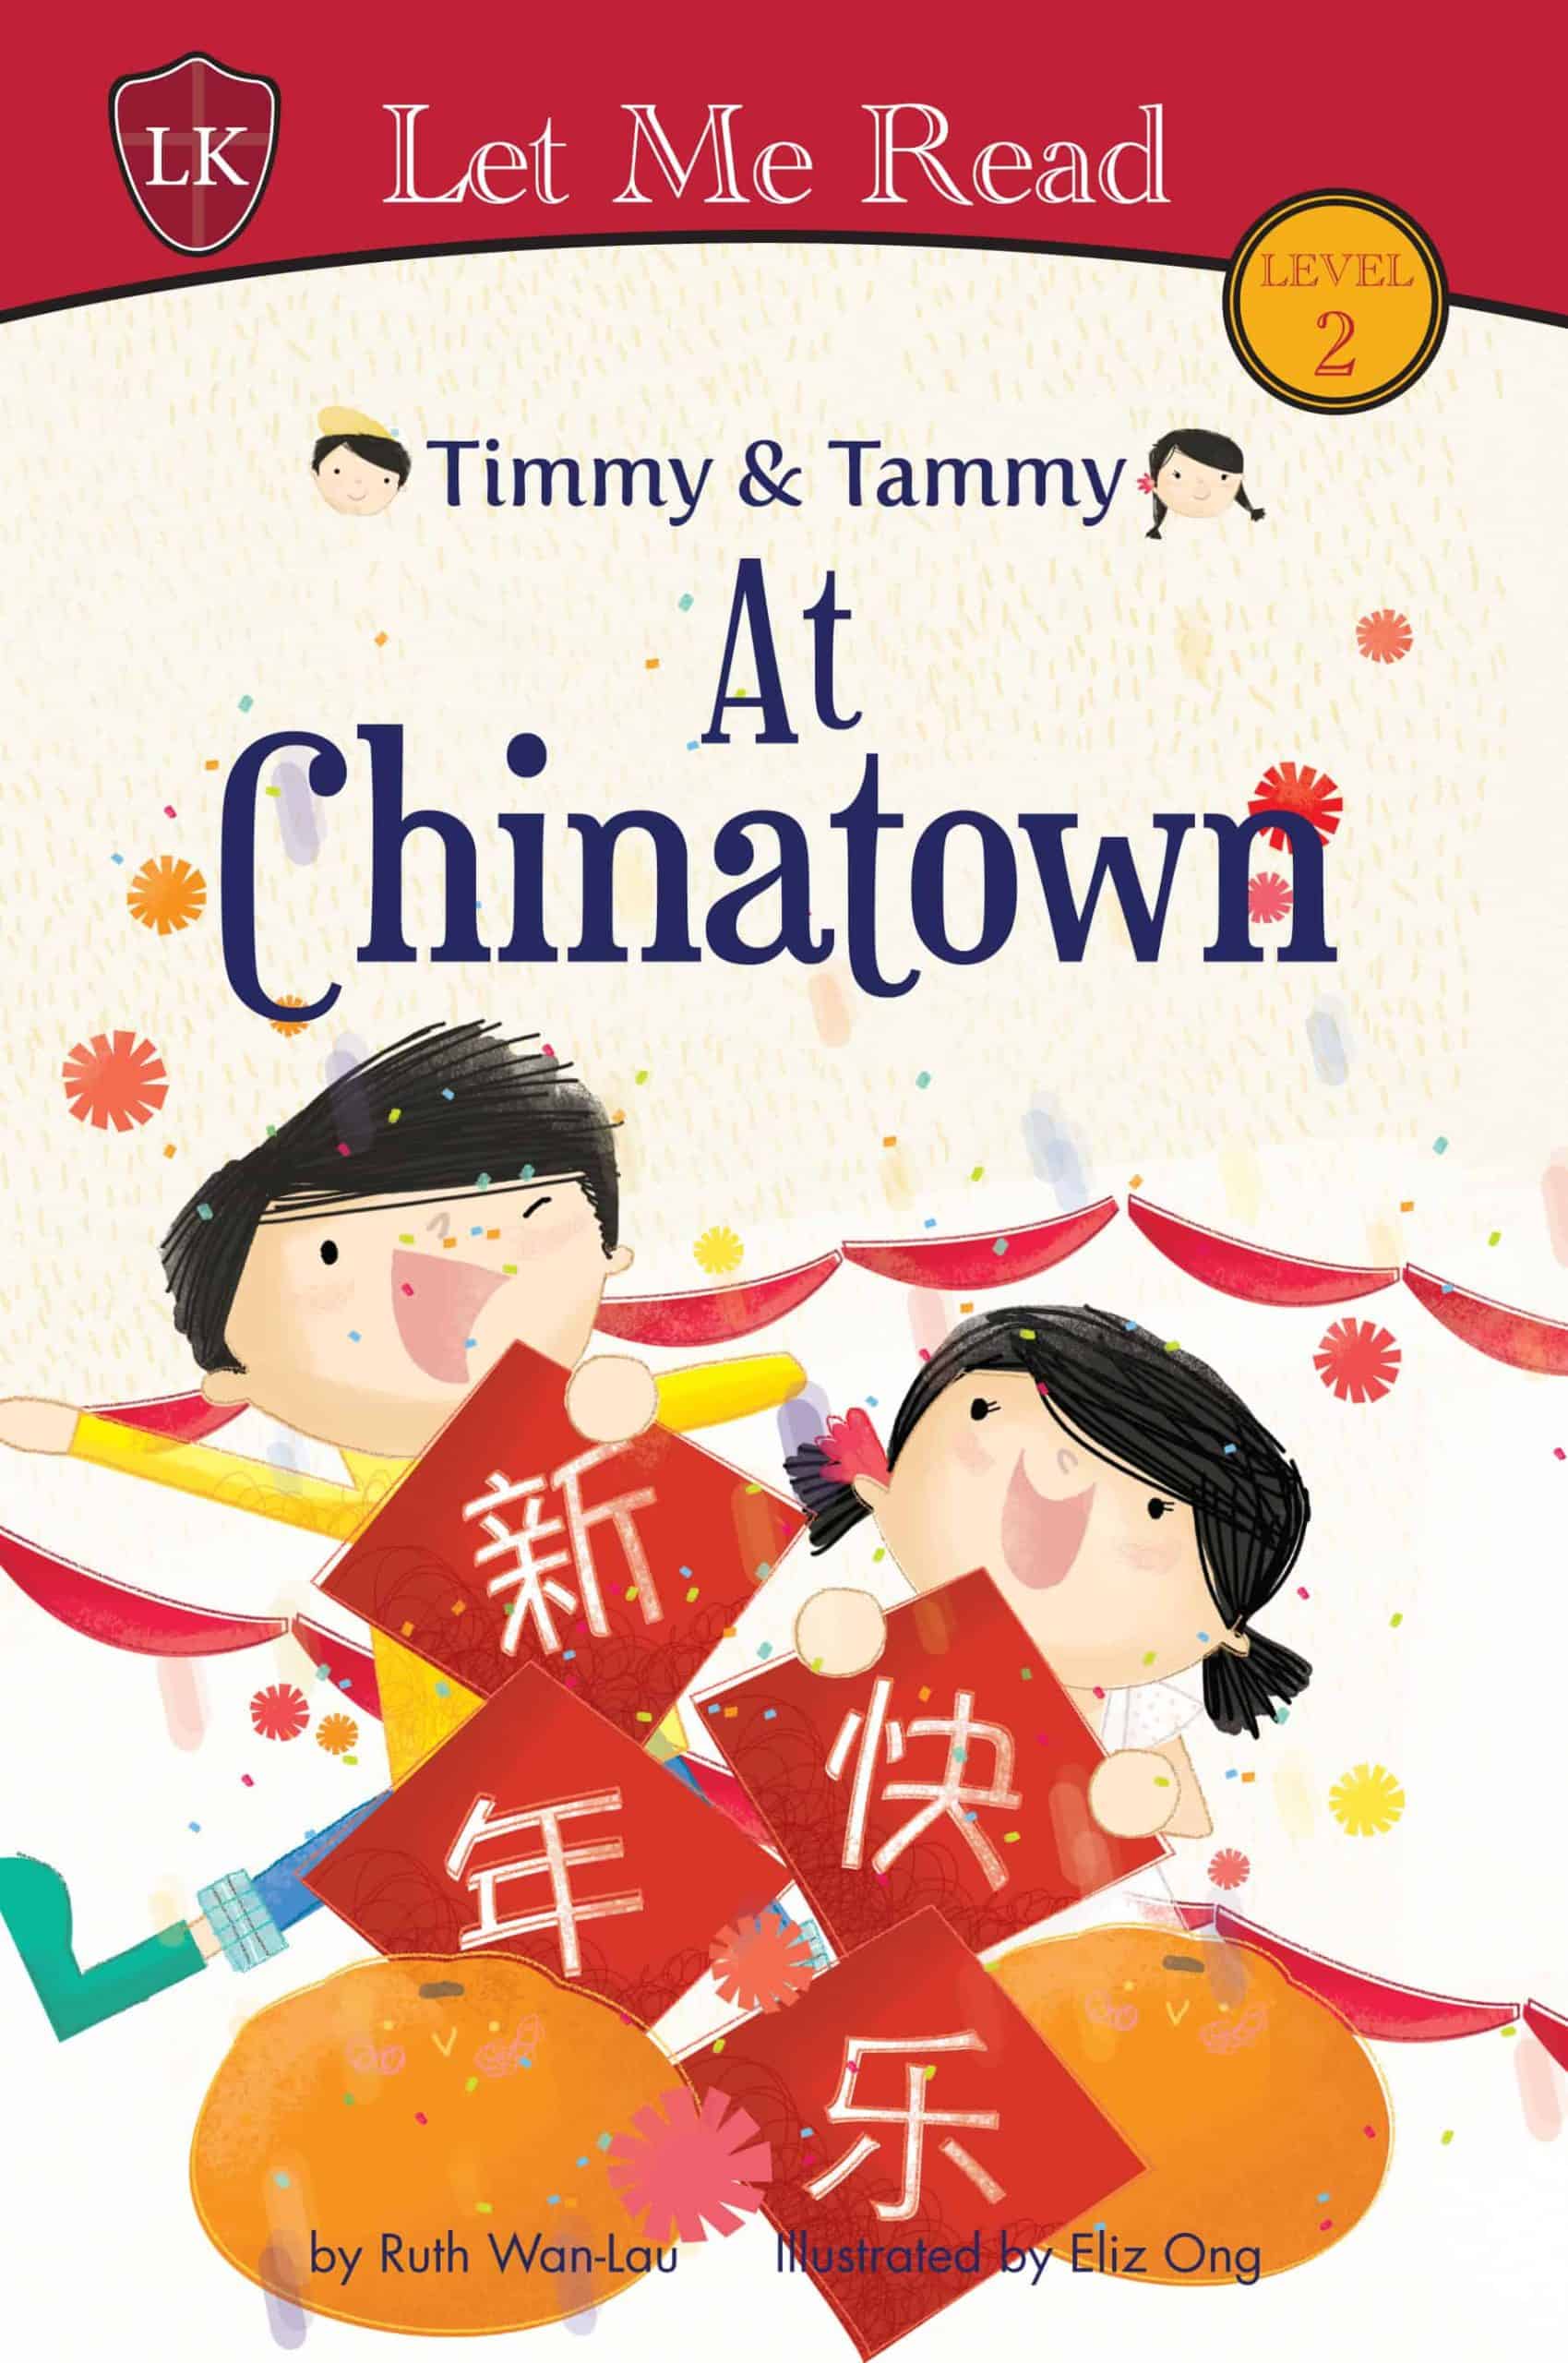 Timmy & Tammy (Level 2): At Chinatown